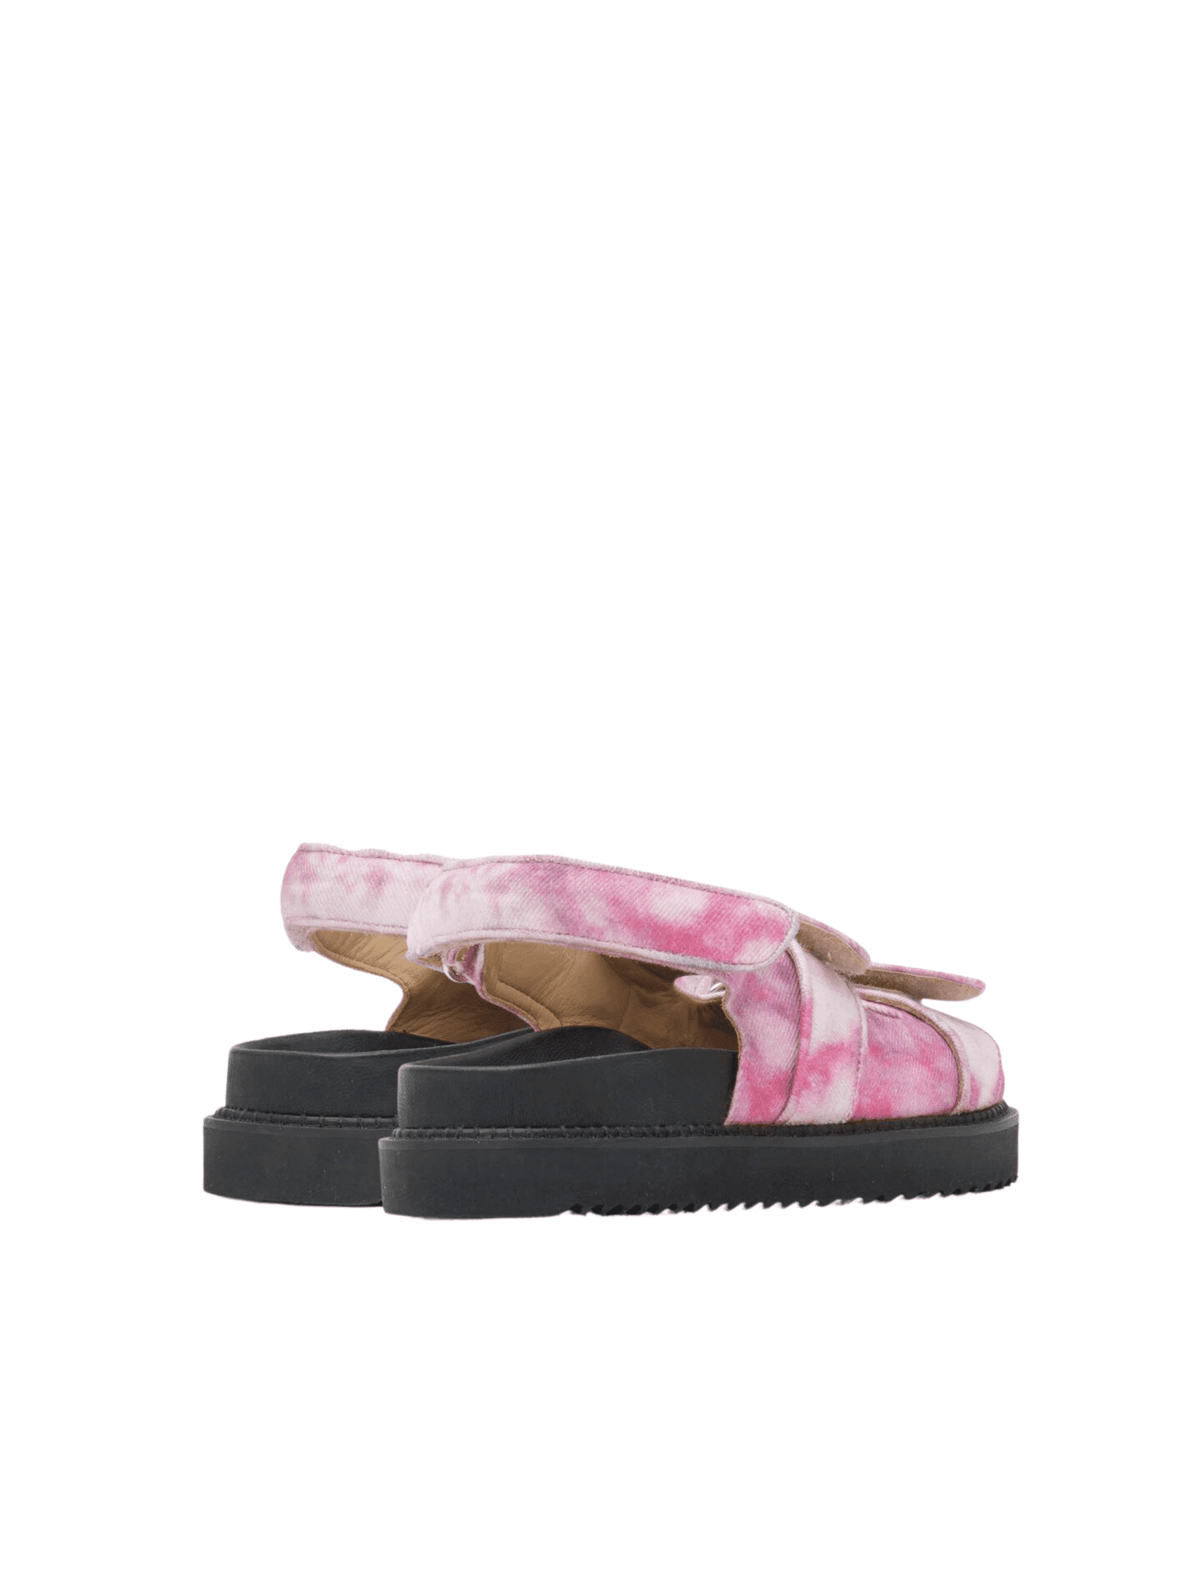 Madee Sandals / Mulberry Womens Isabel Marant 